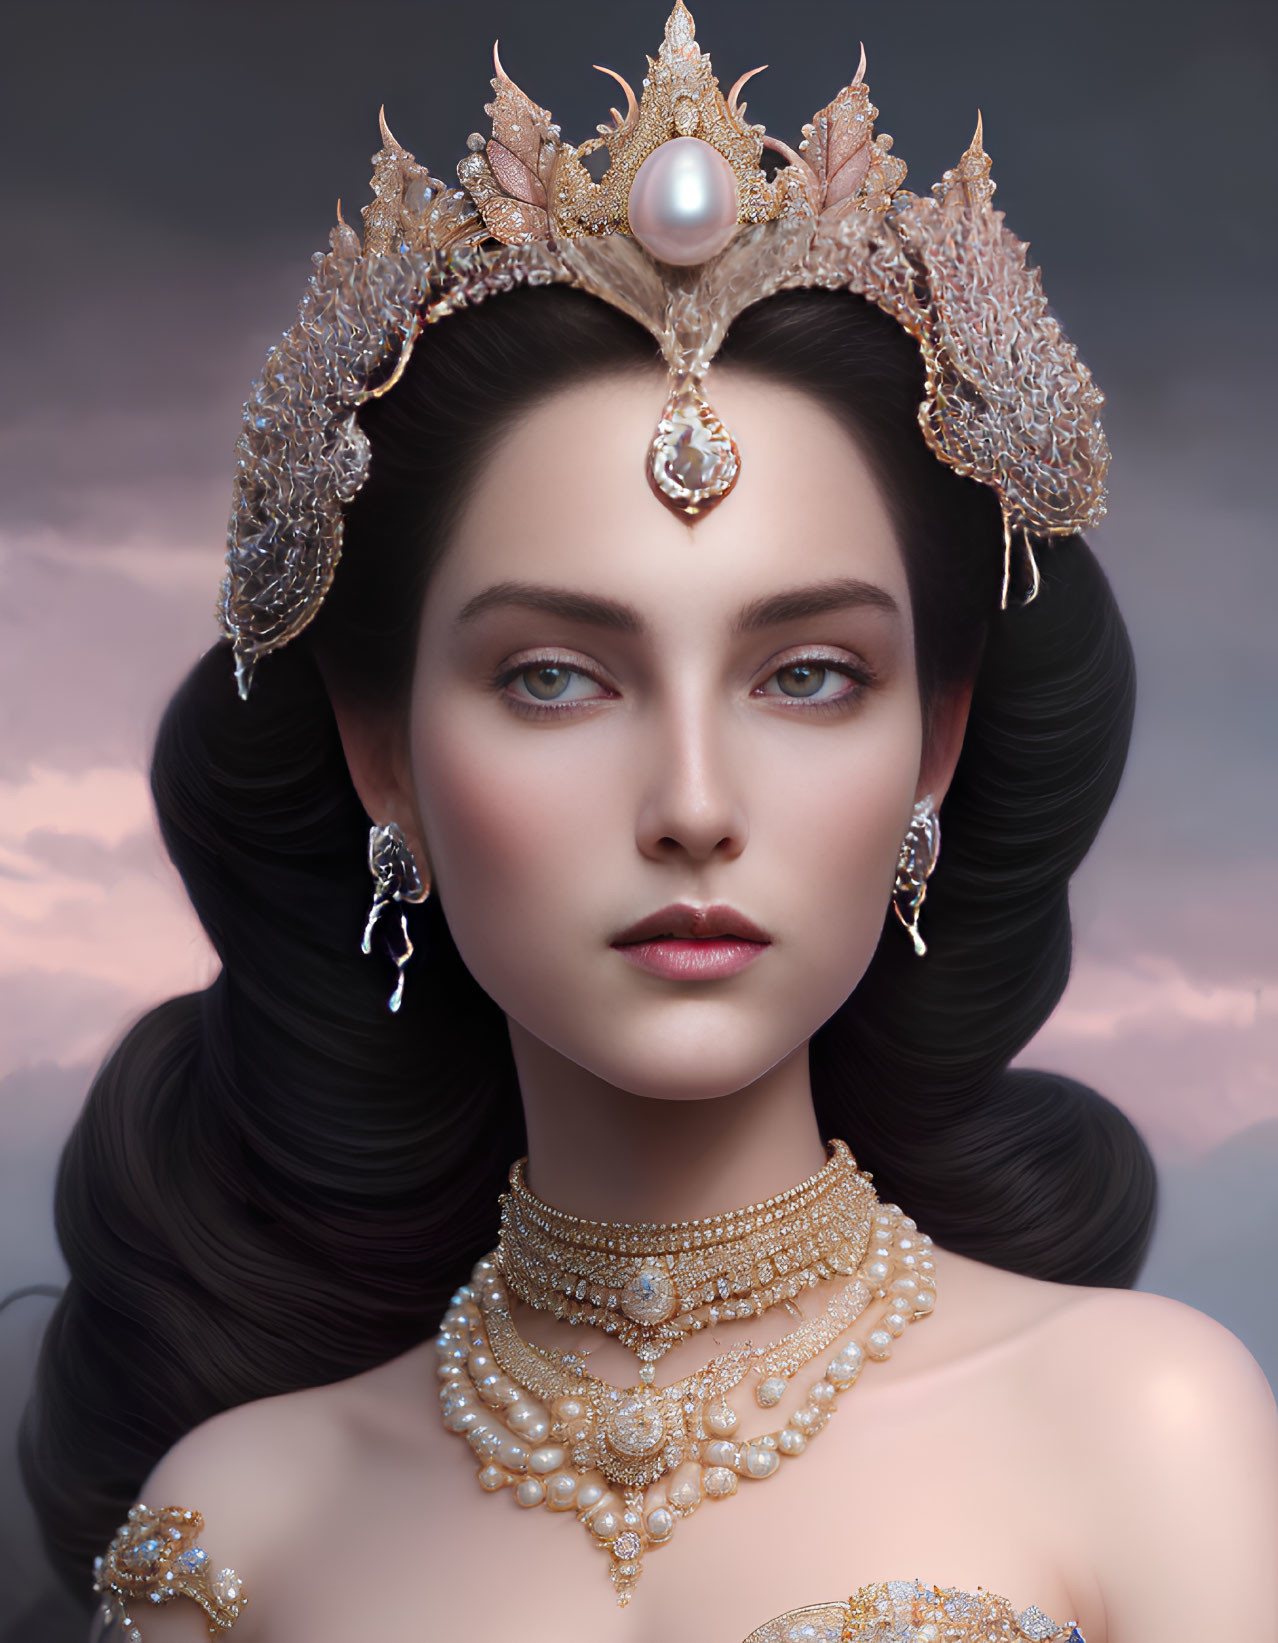 Portrait of woman with dark hair in pearl and gold jewelry against cloudy sky